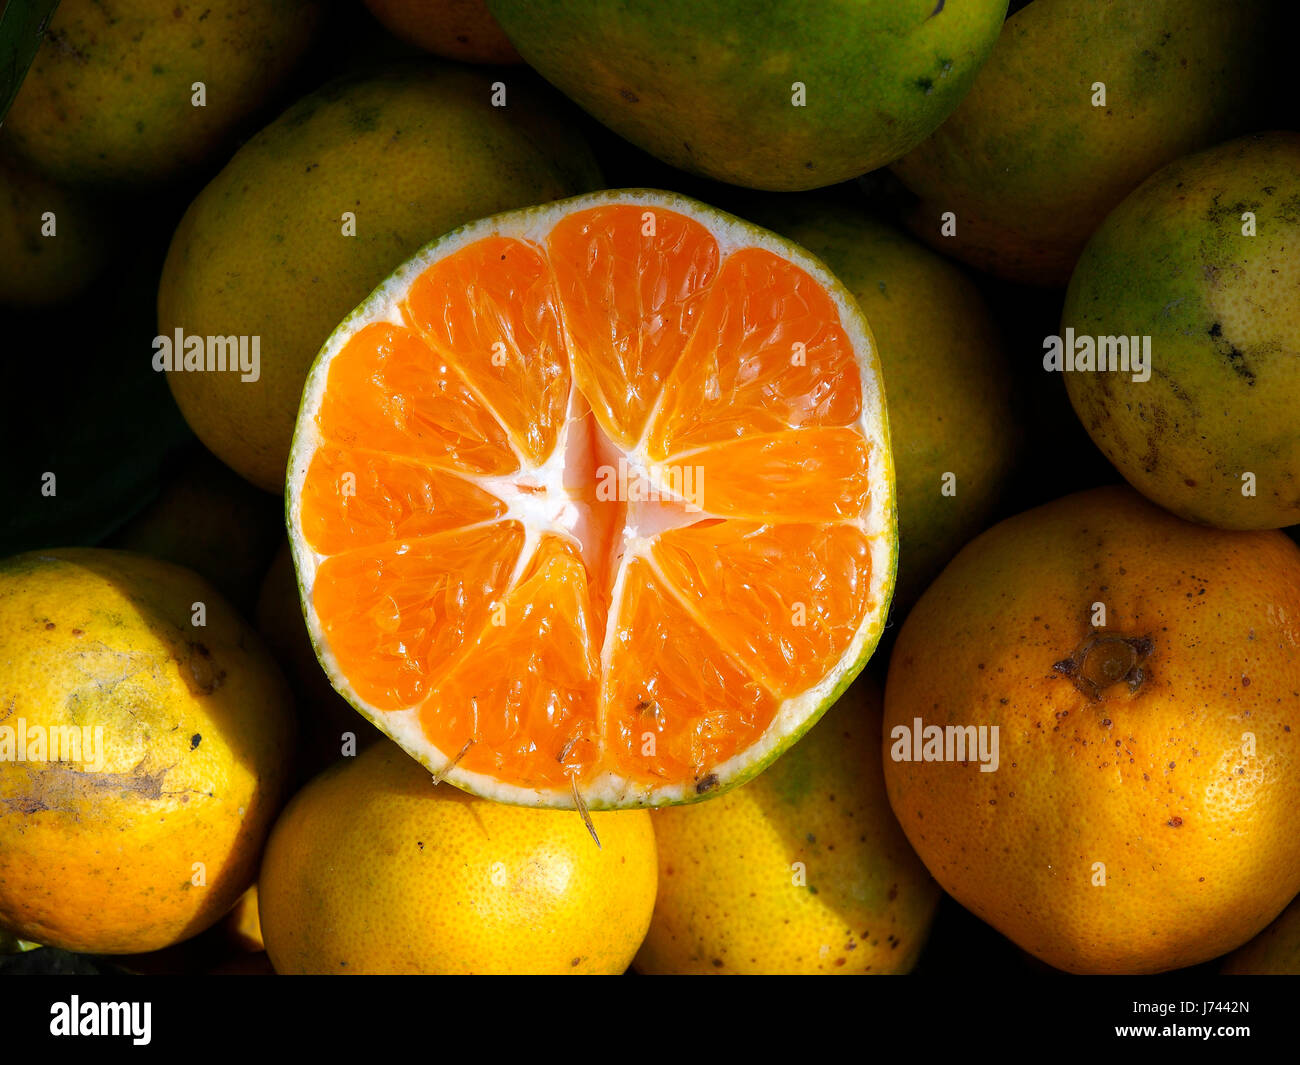 Fruit. Cut tangerine on a stand. Stock Photo